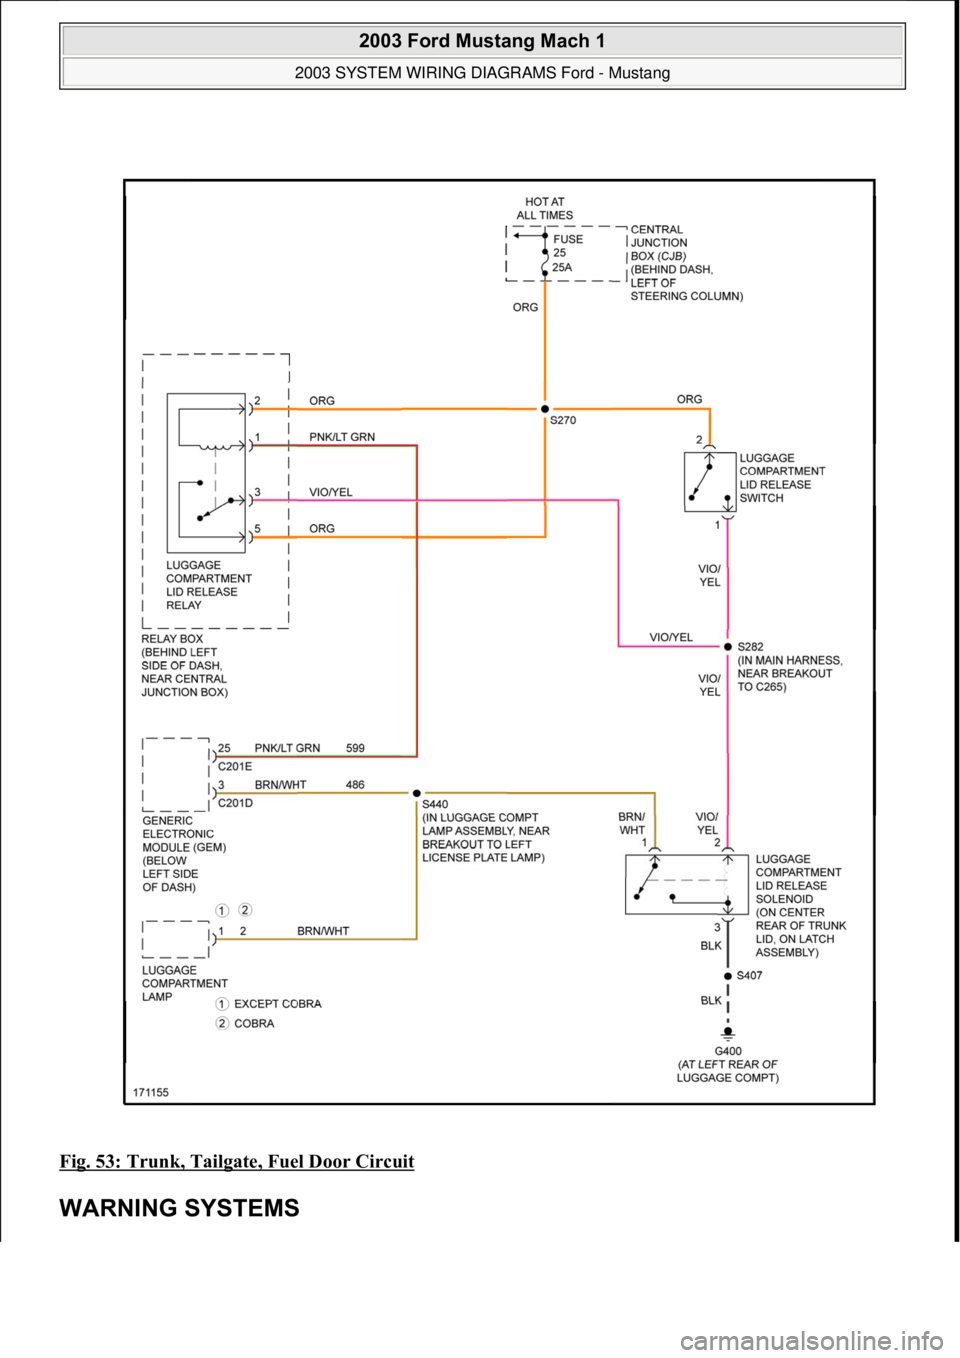 FORD MUSTANG 2003  Workshop Manual Fig. 53: Trunk, Tailgate, Fuel Door Circuit 
WARNING SYSTEMS 
 
2003 Ford Mustang Mach 1 
2003 SYSTEM WIRING DIAGRAMS Ford - Mustang  
111  
18 ноября  2011 г. 12:54:33Page 54 © 2006 Mitchell 